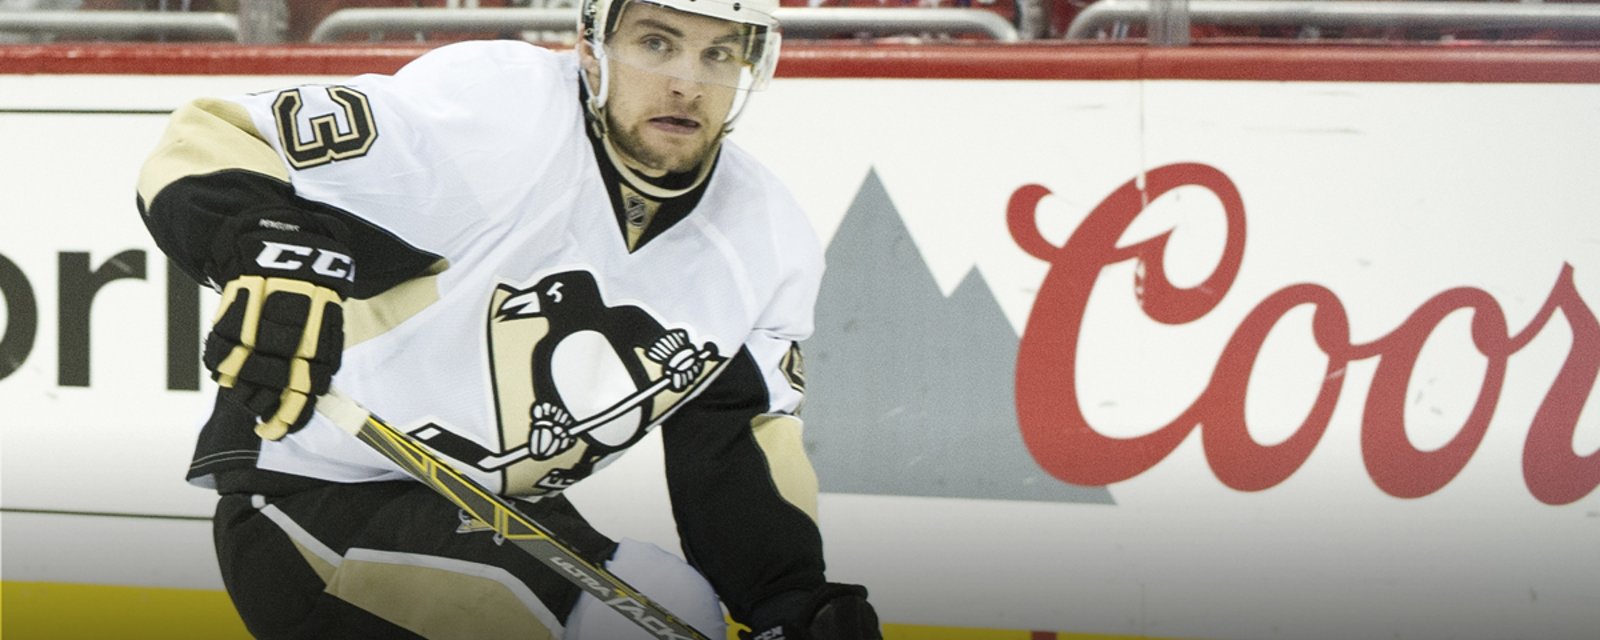 We've all been pronouncing Conor Sheary's name wrong!